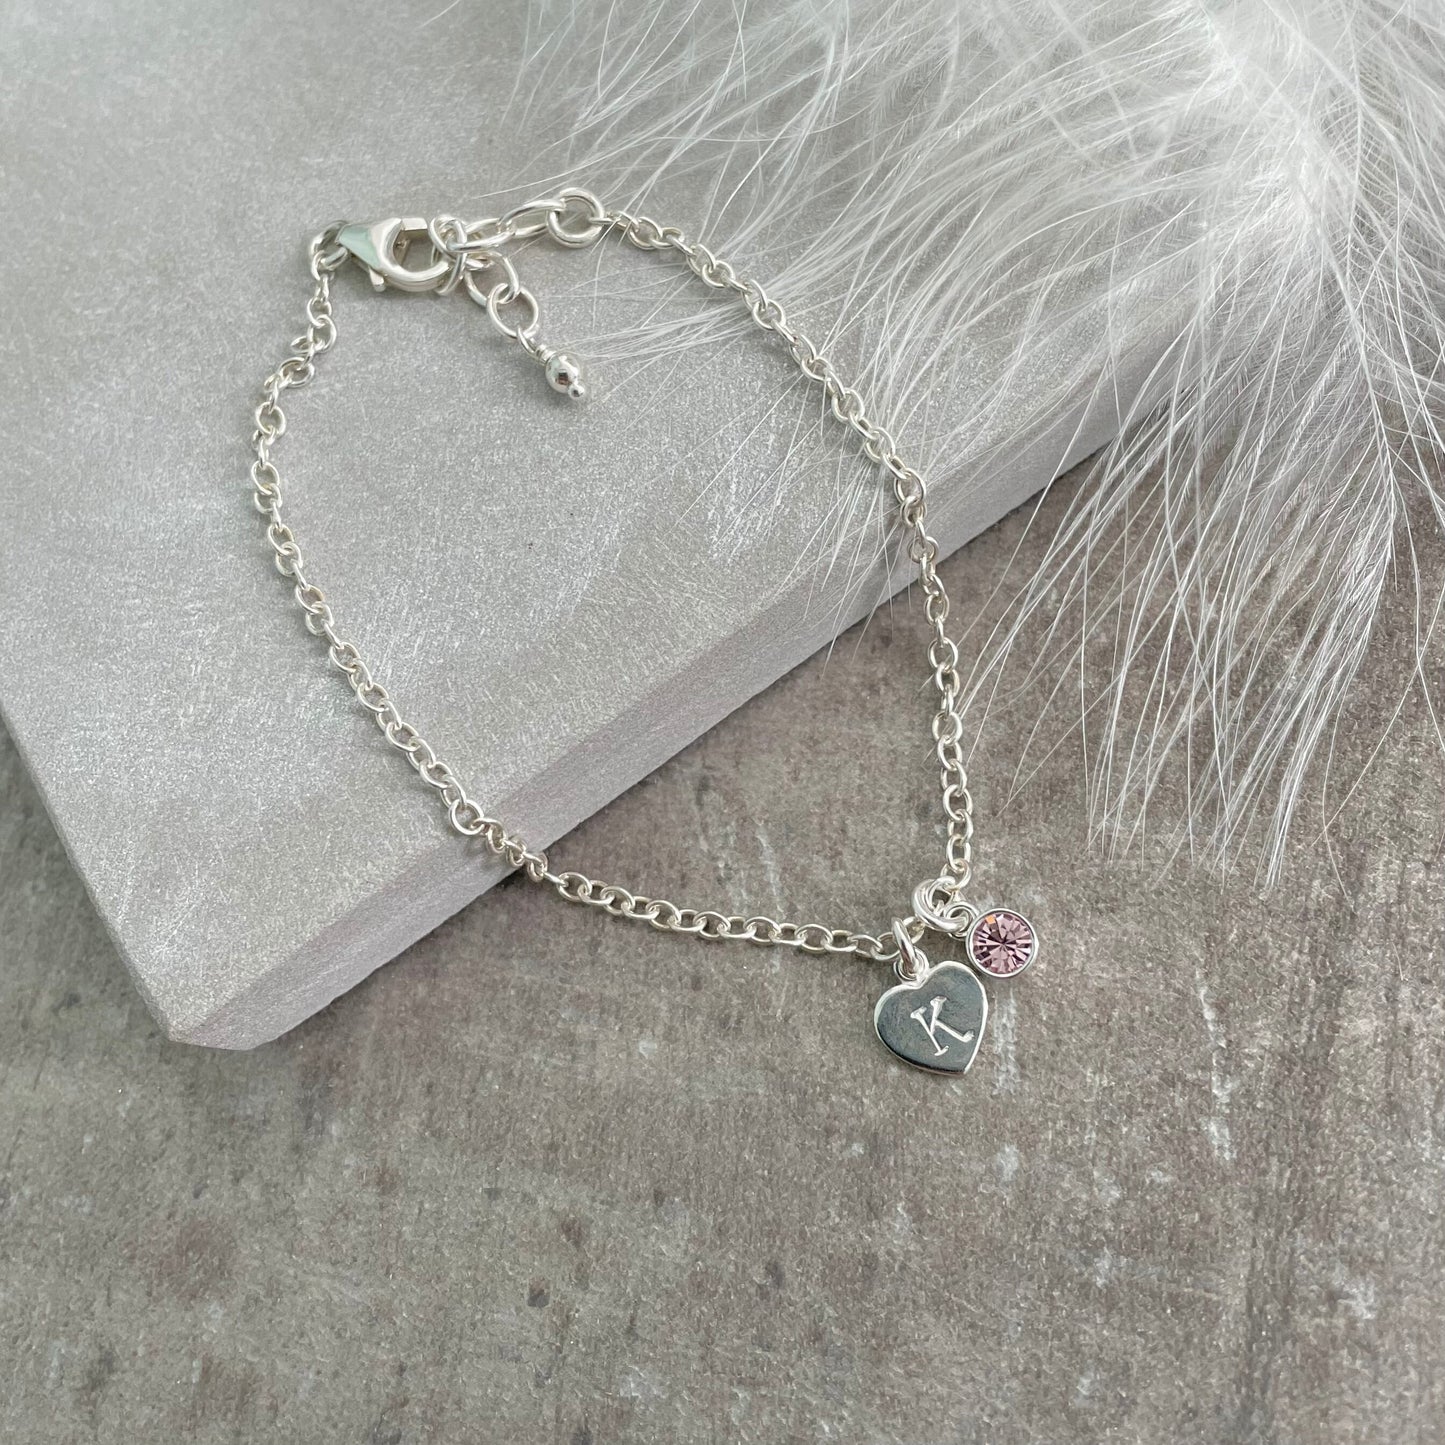 Personalised Initial Bracelet on Chain, Dainty Sterling Silver Jewellery